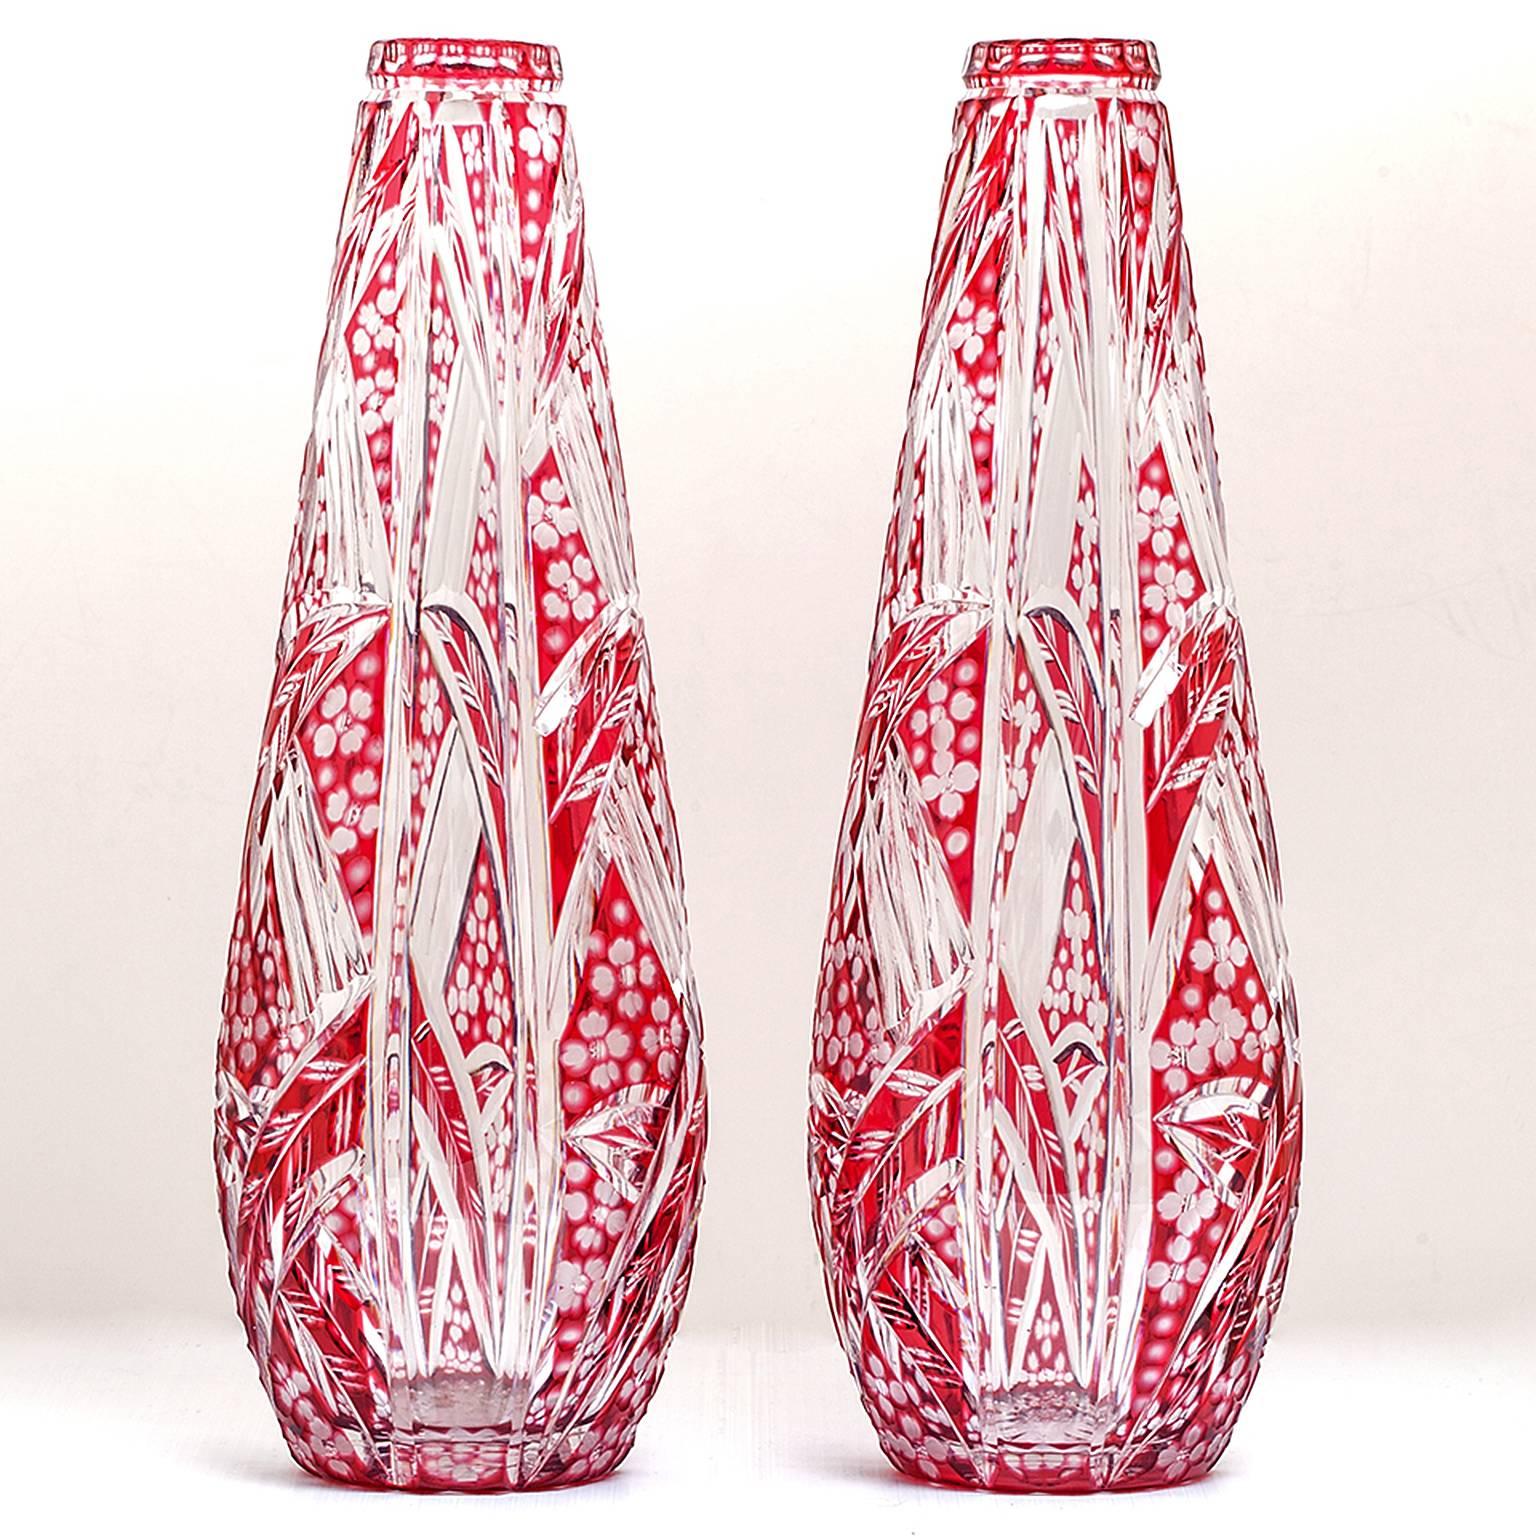 Circa 1930s, by Saint Louis, France.  This incredible pair of Art Deco vases by Saint Louis flaunts a sleek floral pattern in ruby cut-to-clear crystal. Exciting to look at, the design has more than one visual surface.  At the fine detail level,